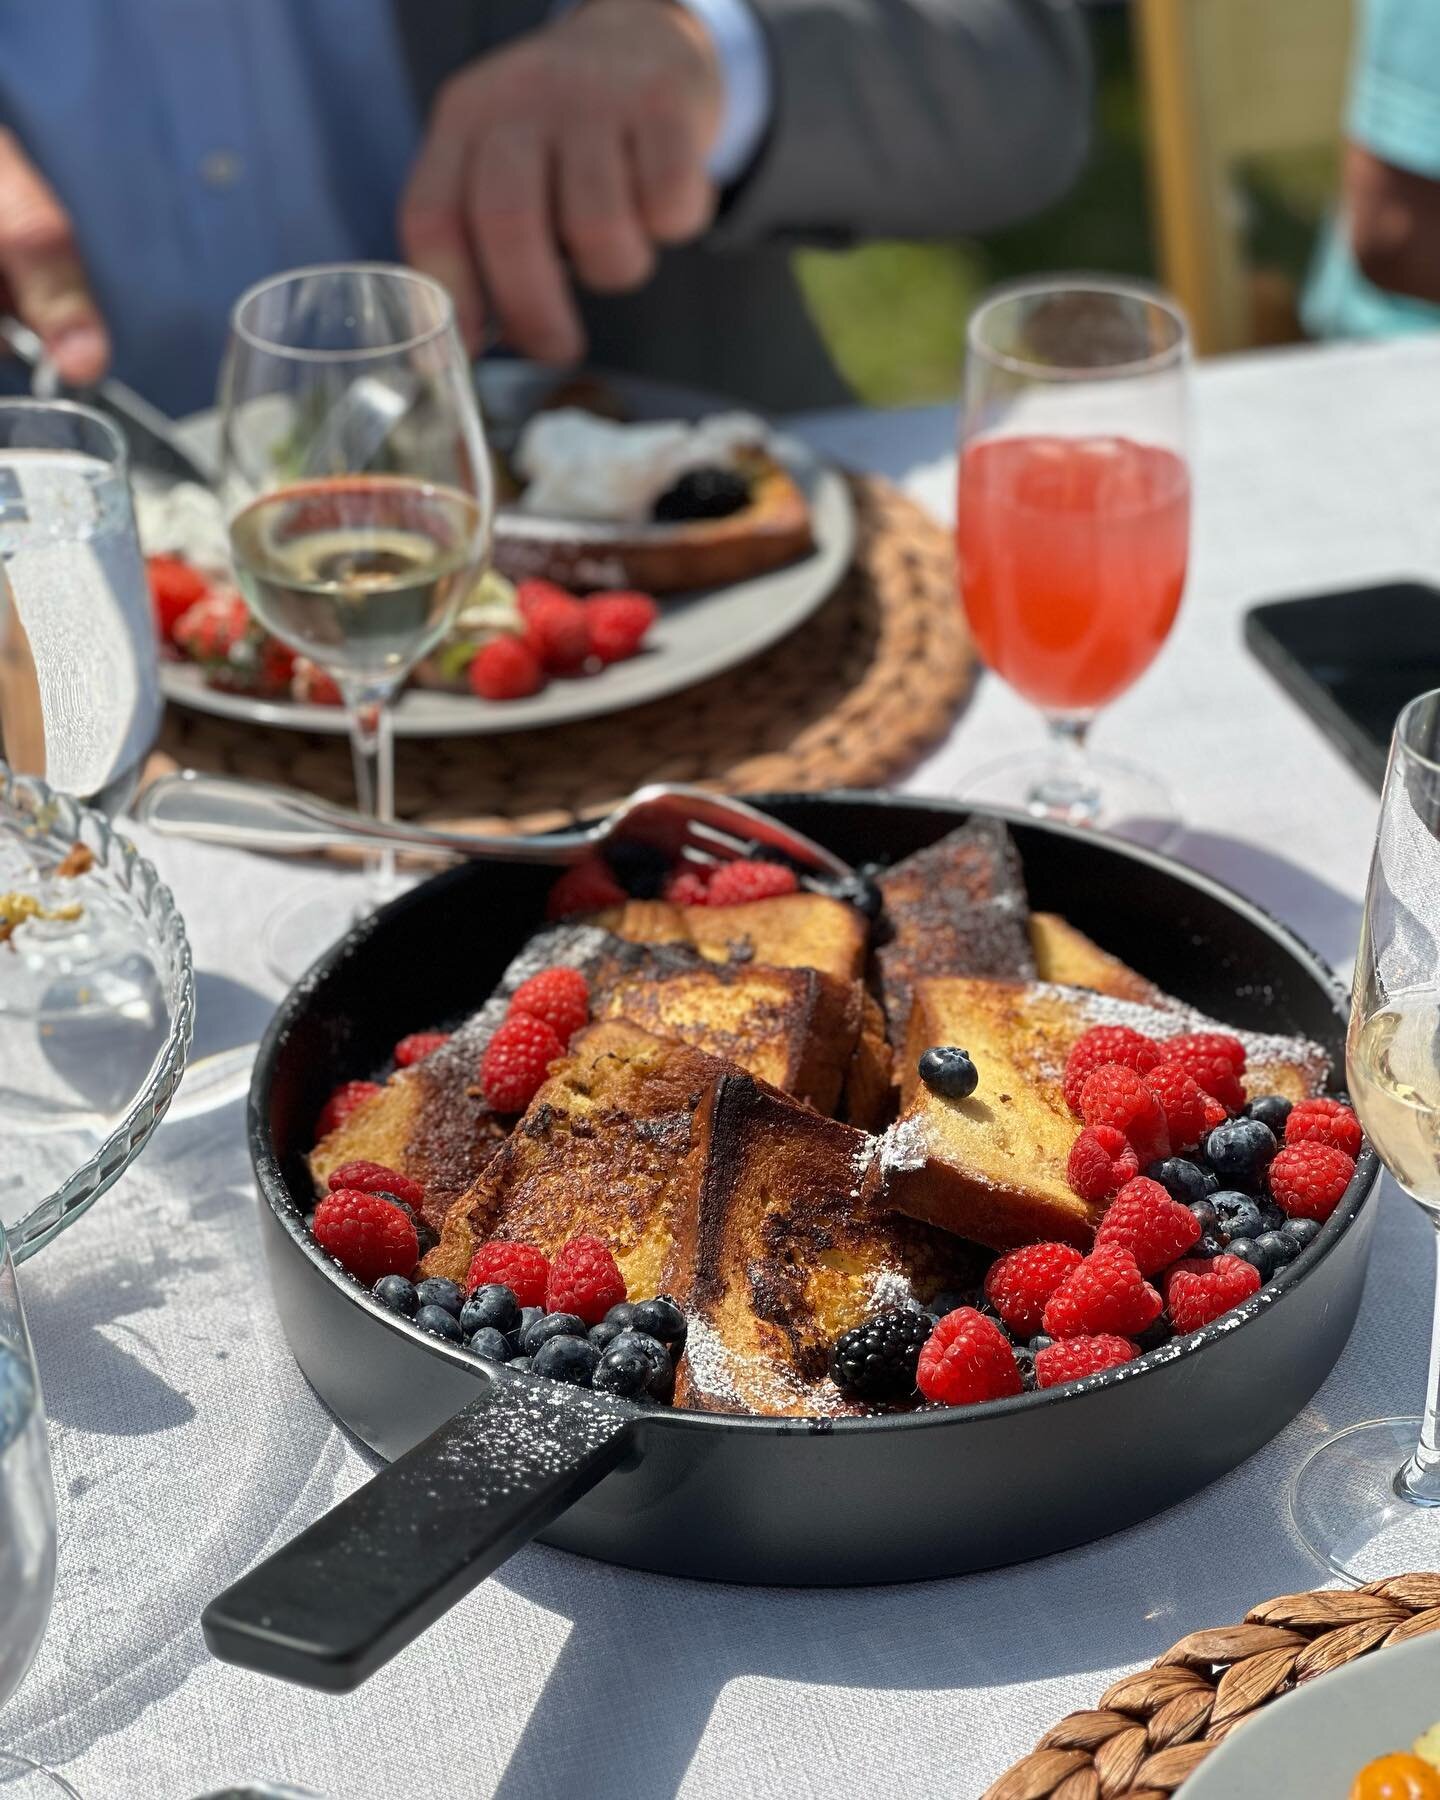 When your family loves to brunch&hellip;you pick #brunch to celebrate your wedding! 
.
🥂Orange &amp; Cinnamon French Toast
🥂Poached Wild Salmon with dill cr&egrave;me fra&iuml;che
🥂Watermelon &amp; Feta Salad
🥂 Albacore Tuna Ni&ccedil;oise

Renta